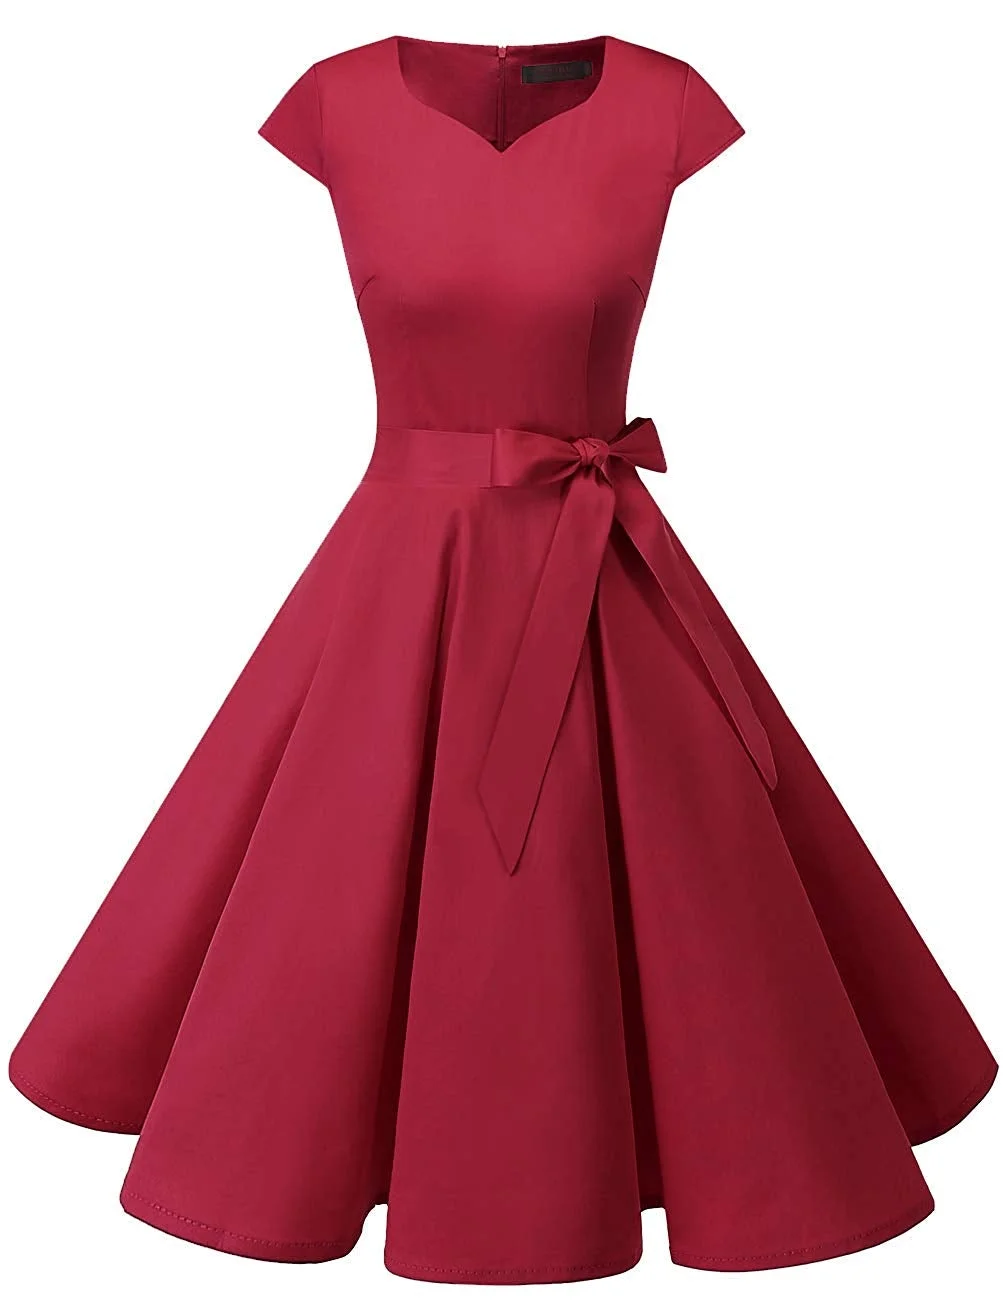 Vintage Dress Women's Tea Dress Prom Swing Cocktail Party Dress with Cap-Sleeves